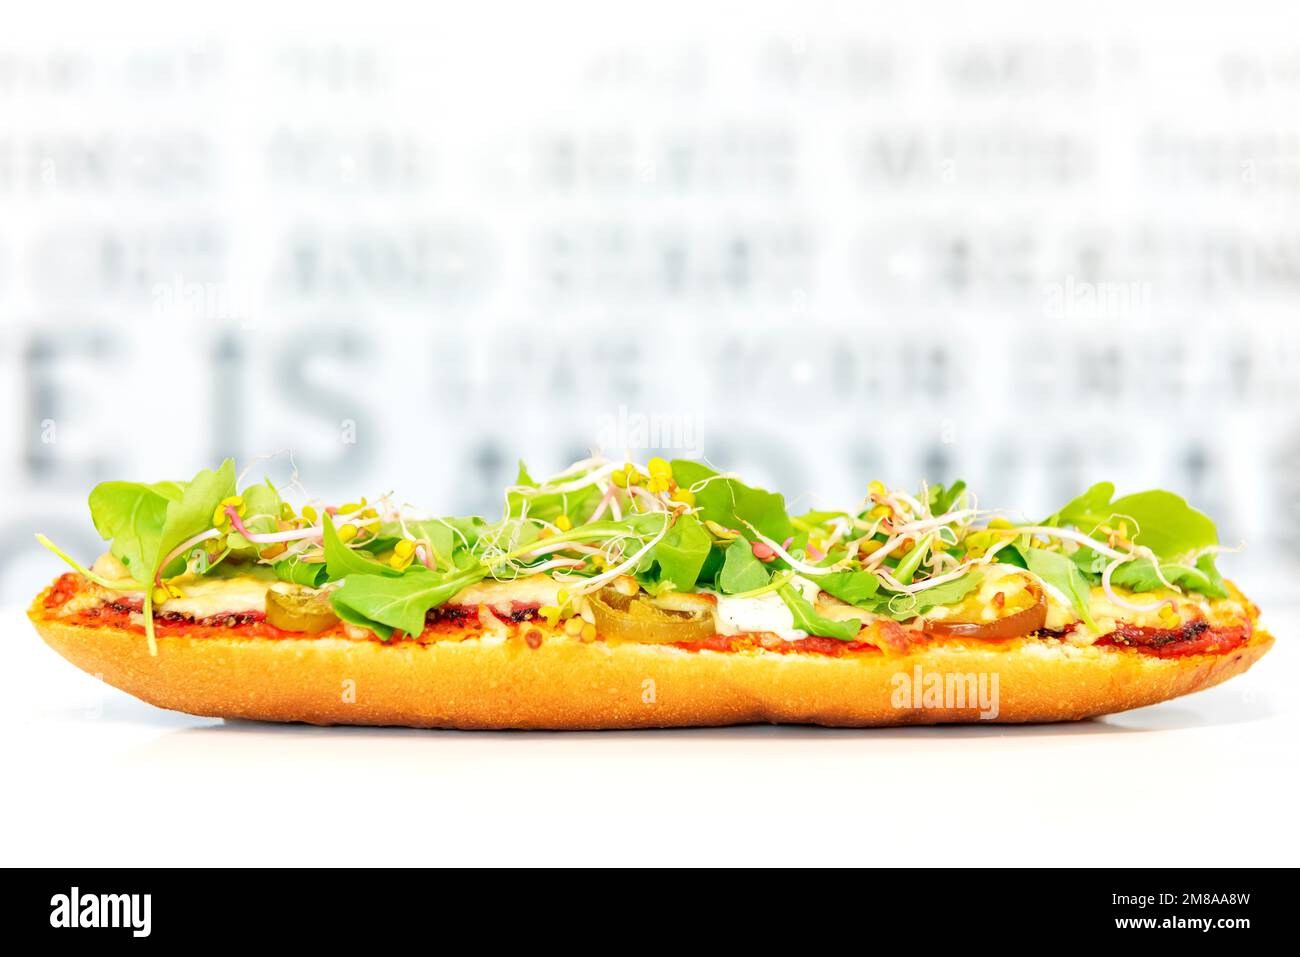 baguette with tomato sauce, meat, jalapeno and arugula baked with cheese. fast and popular street food Stock Photo